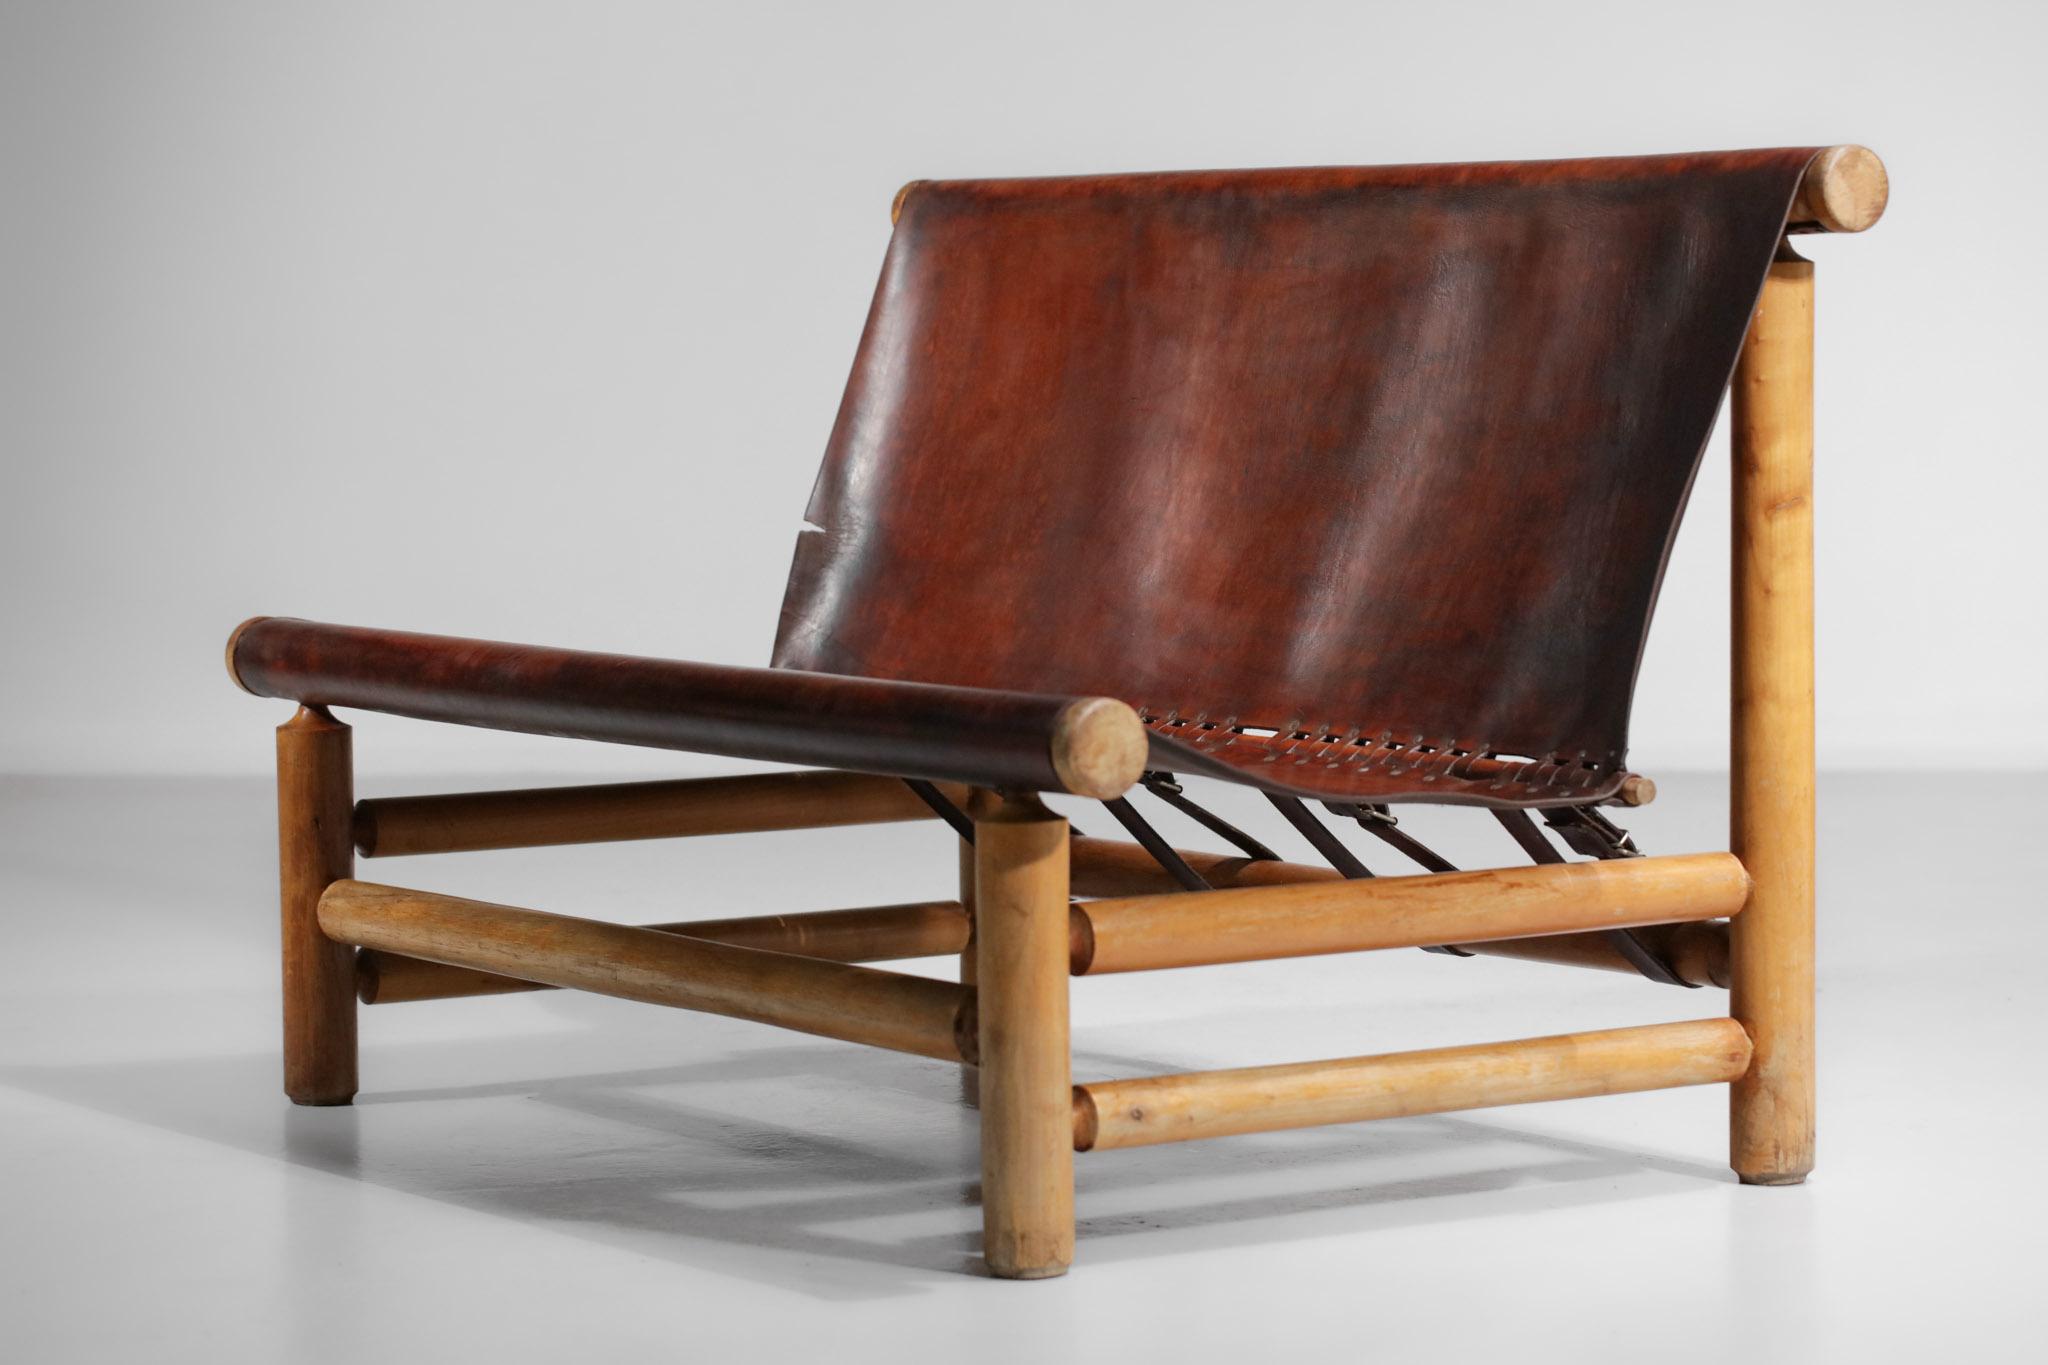 French Pine Bench 50s Style Charlotte Perriand or Ilmarii Tapiovaraa Cognac Leather For Sale